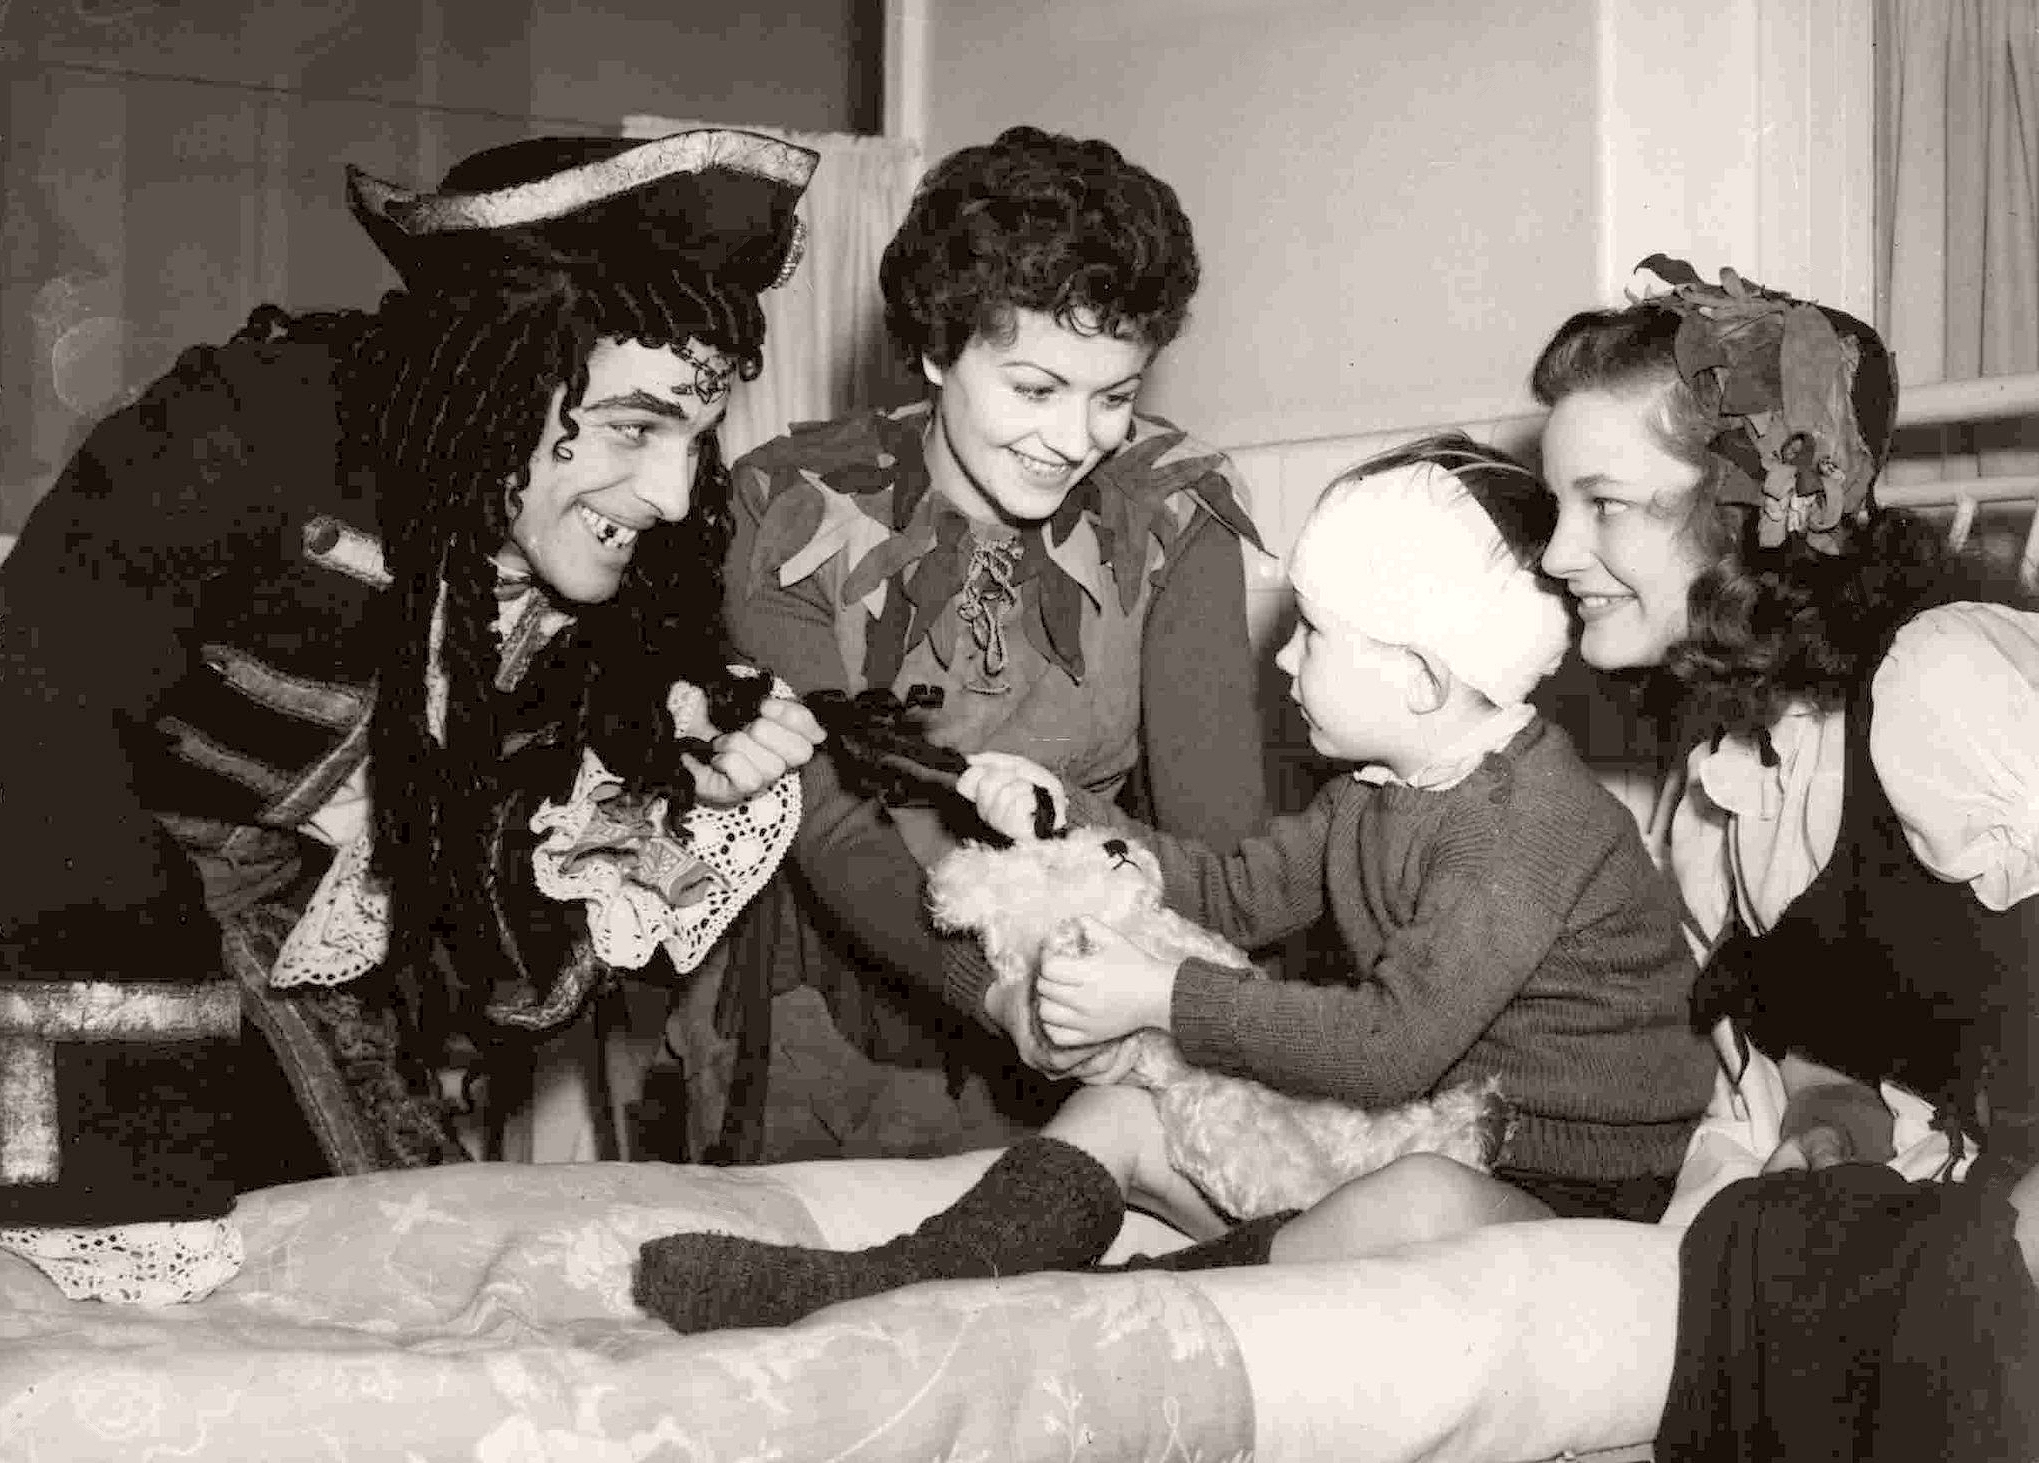 At London’s Great Ormond Street Hospital, the sick children are entertained by Peter Pan (Margaret Lockwood) and Captain Hook (John Justin)